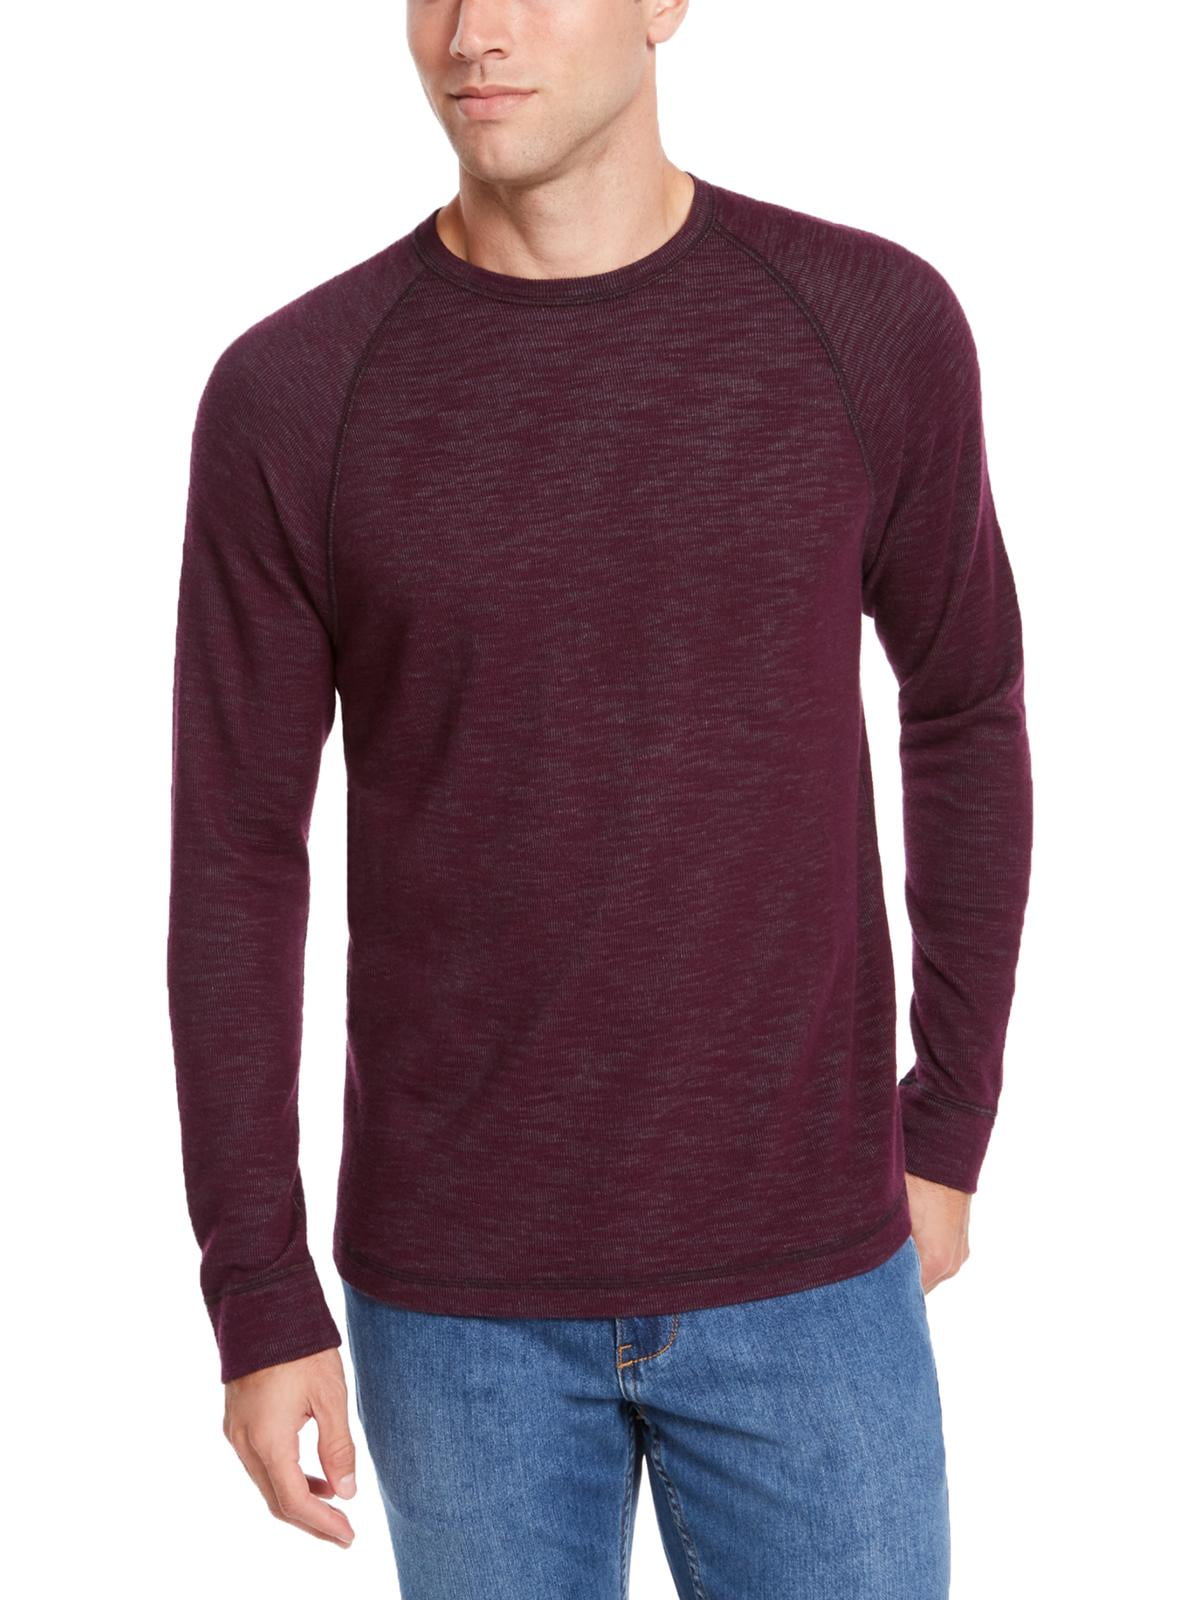 tommy bahama mens sweater sale